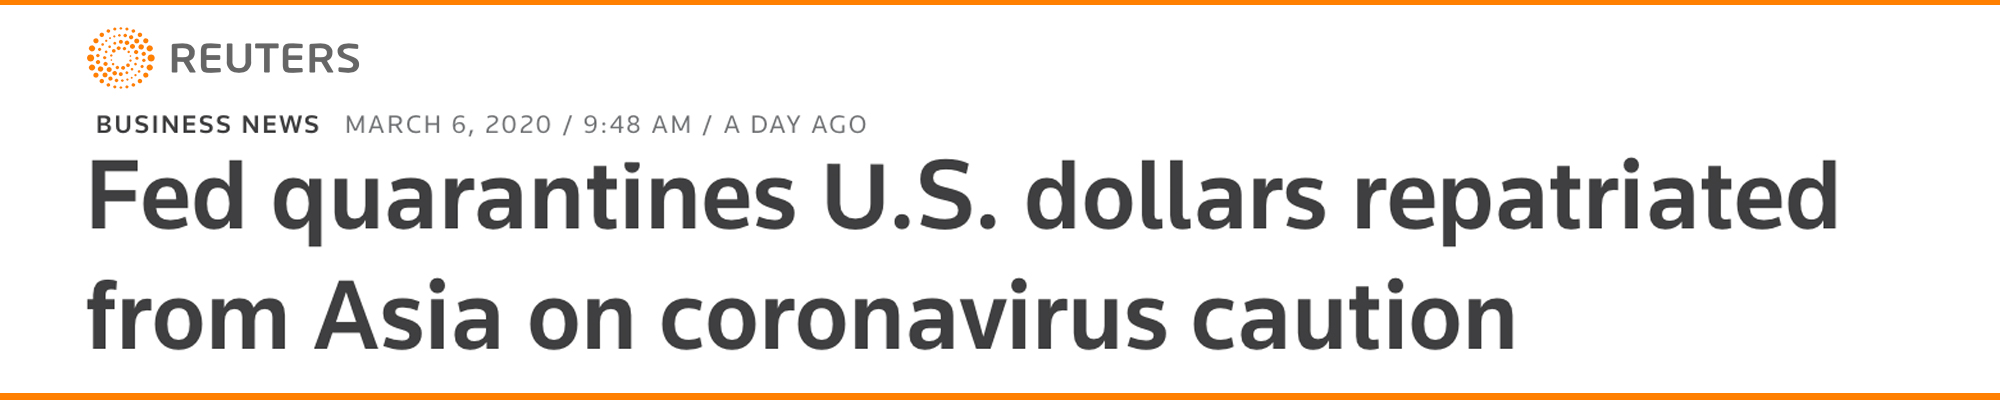 Stimulus, QE, Rate Cuts: Coronavirus Fuels Central Banks' Monetary Easing Policy